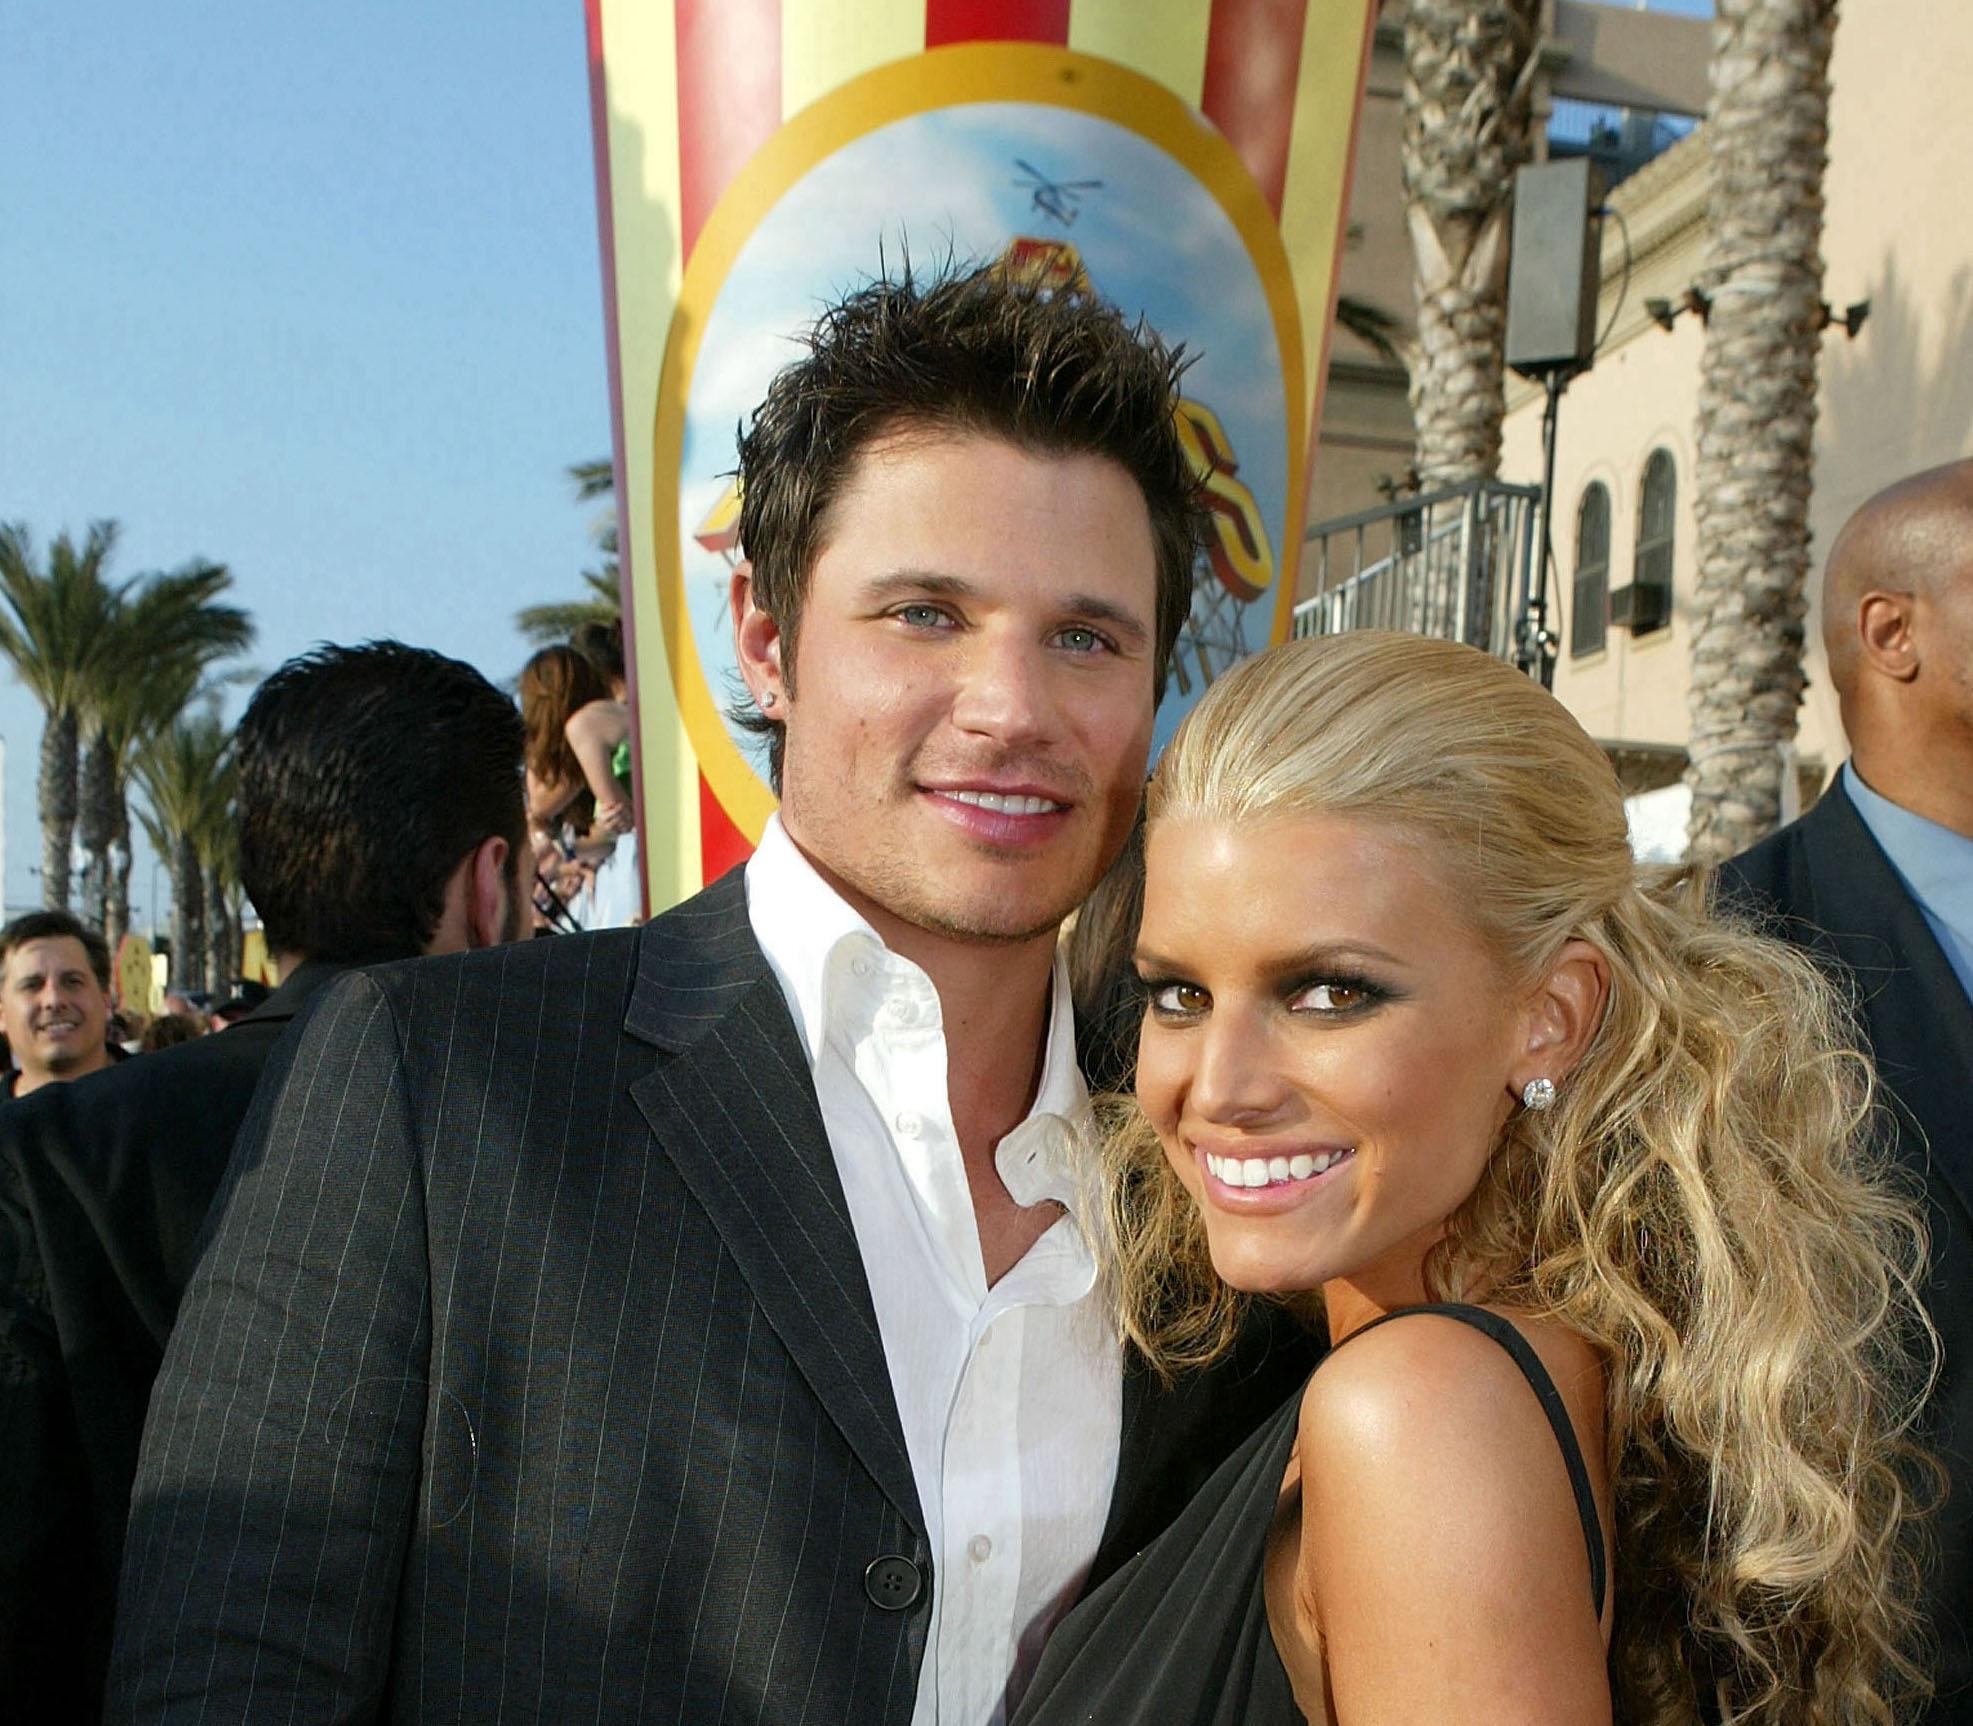 Why Did Nick Lachey and Jessica Simpson Split? Uncovering the Real Reason